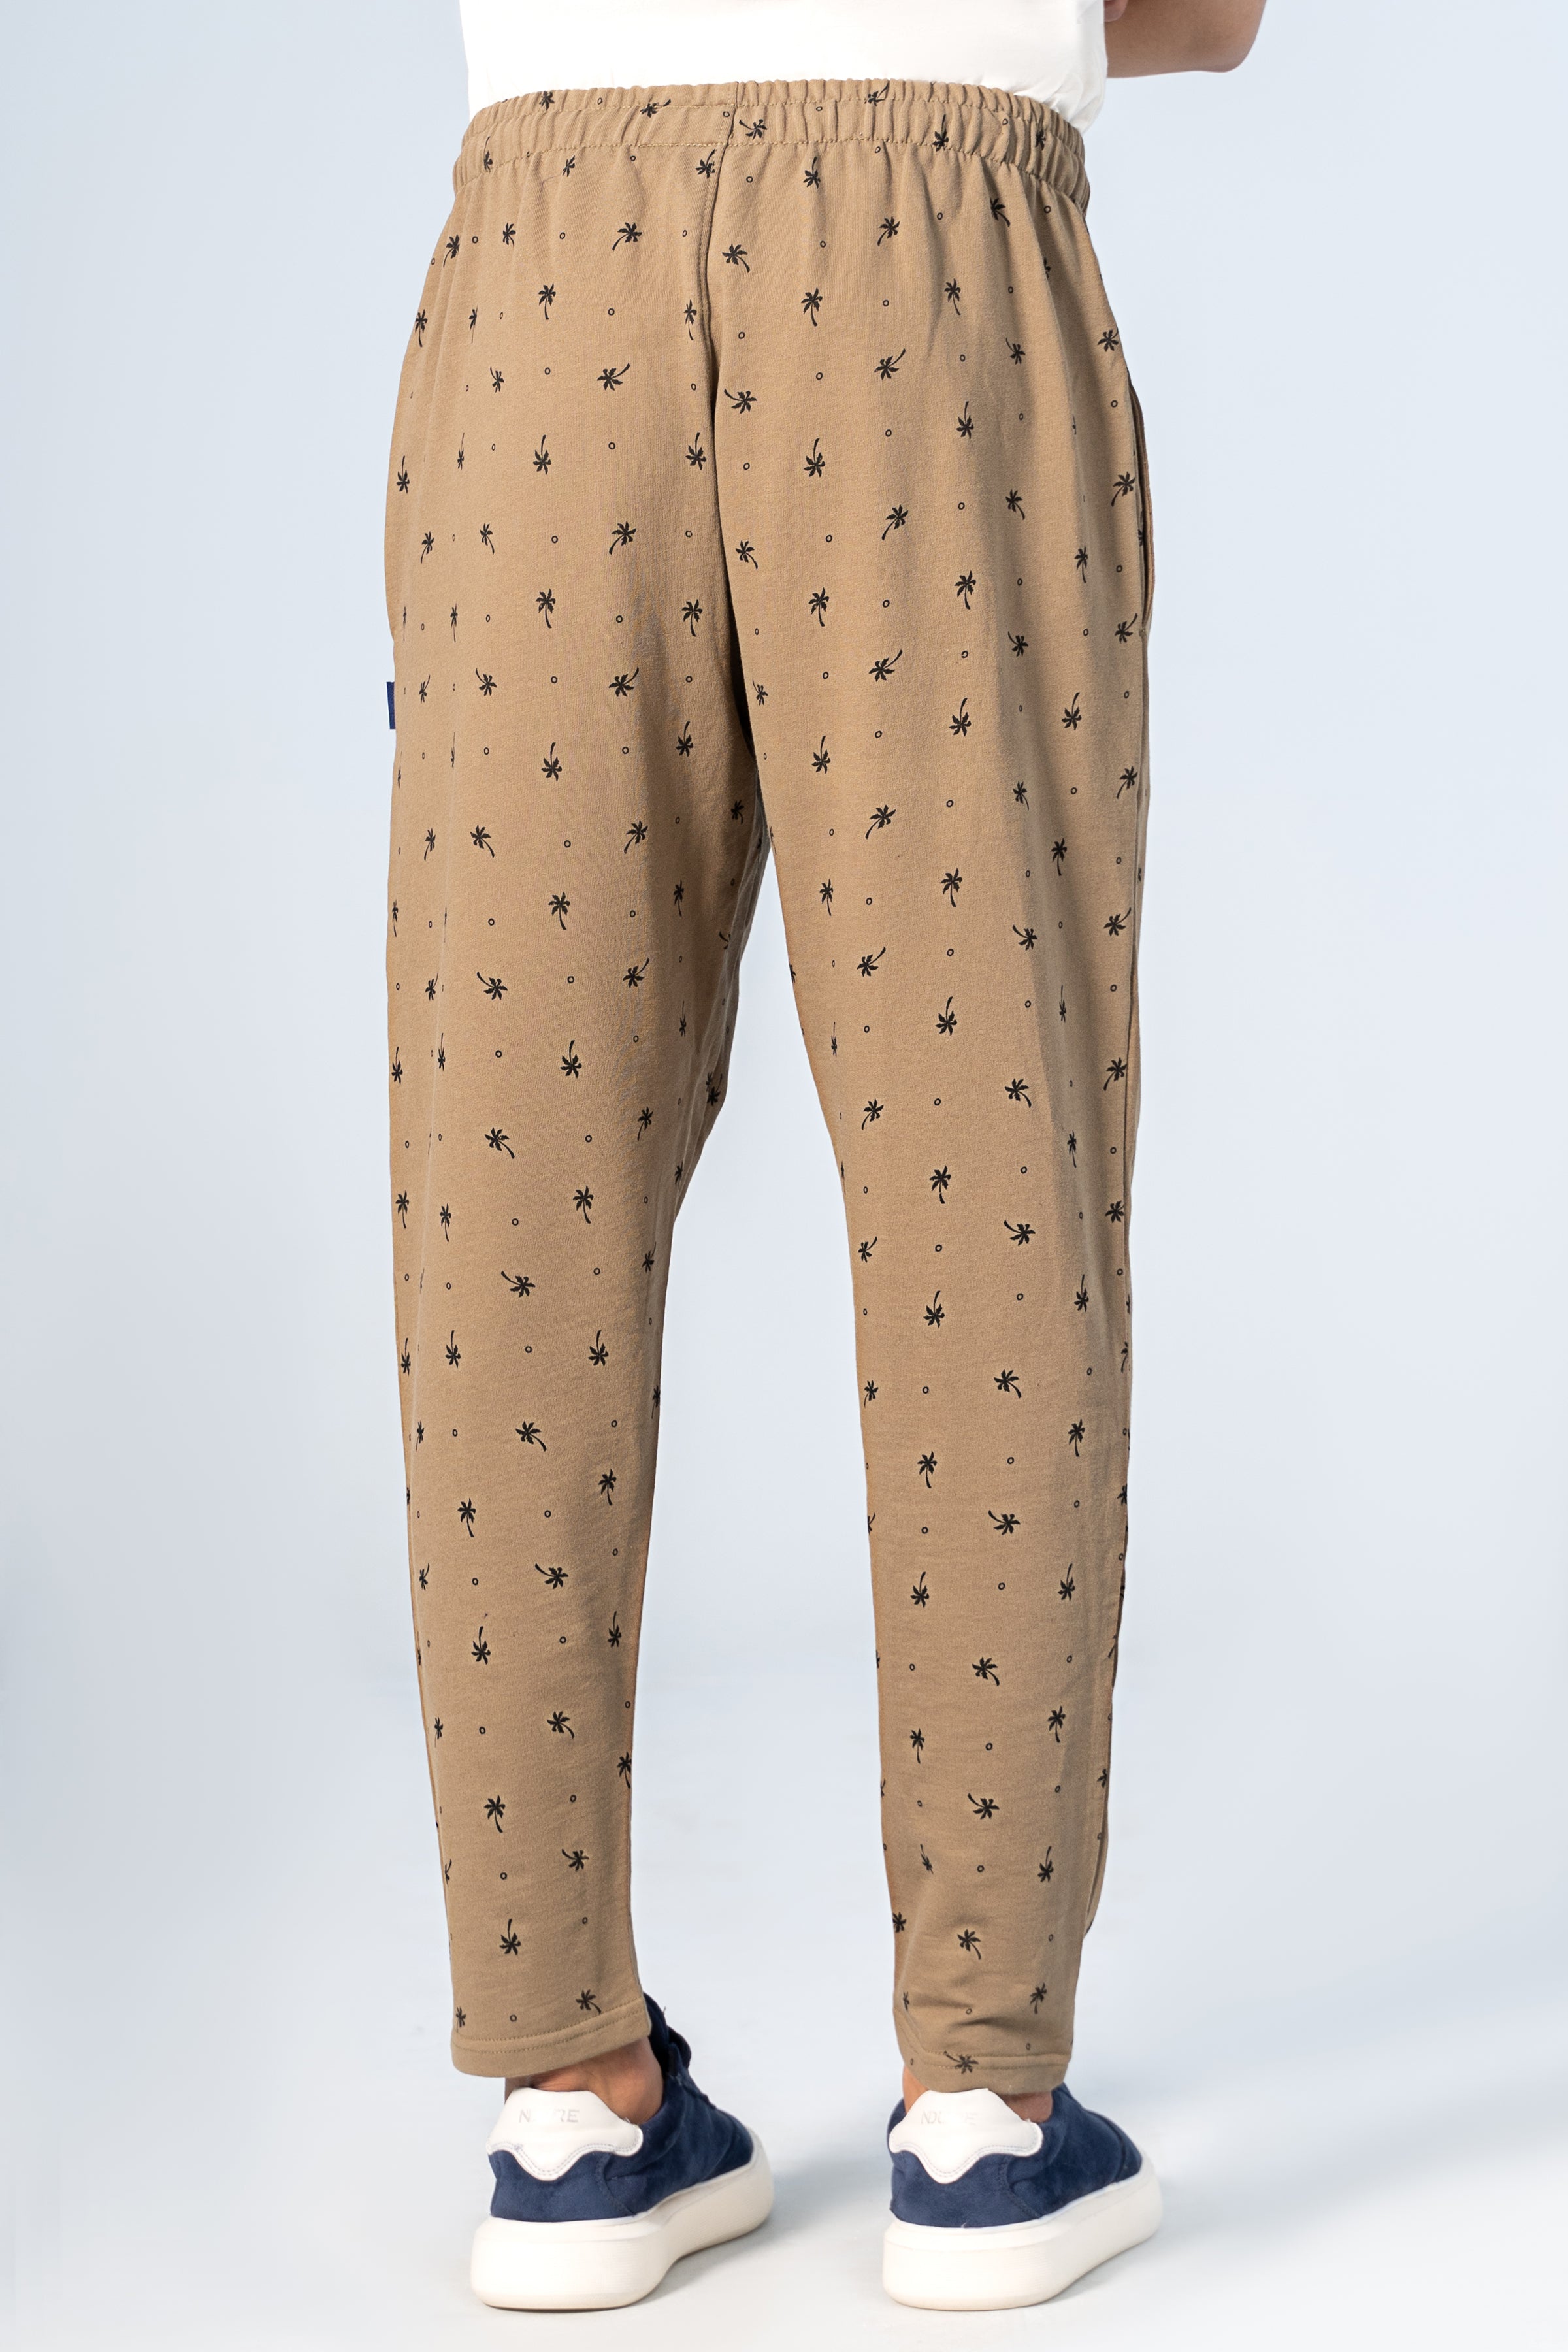 SLEEPWEAR TROUSER OLIVE PRINTED - Charcoal Clothing